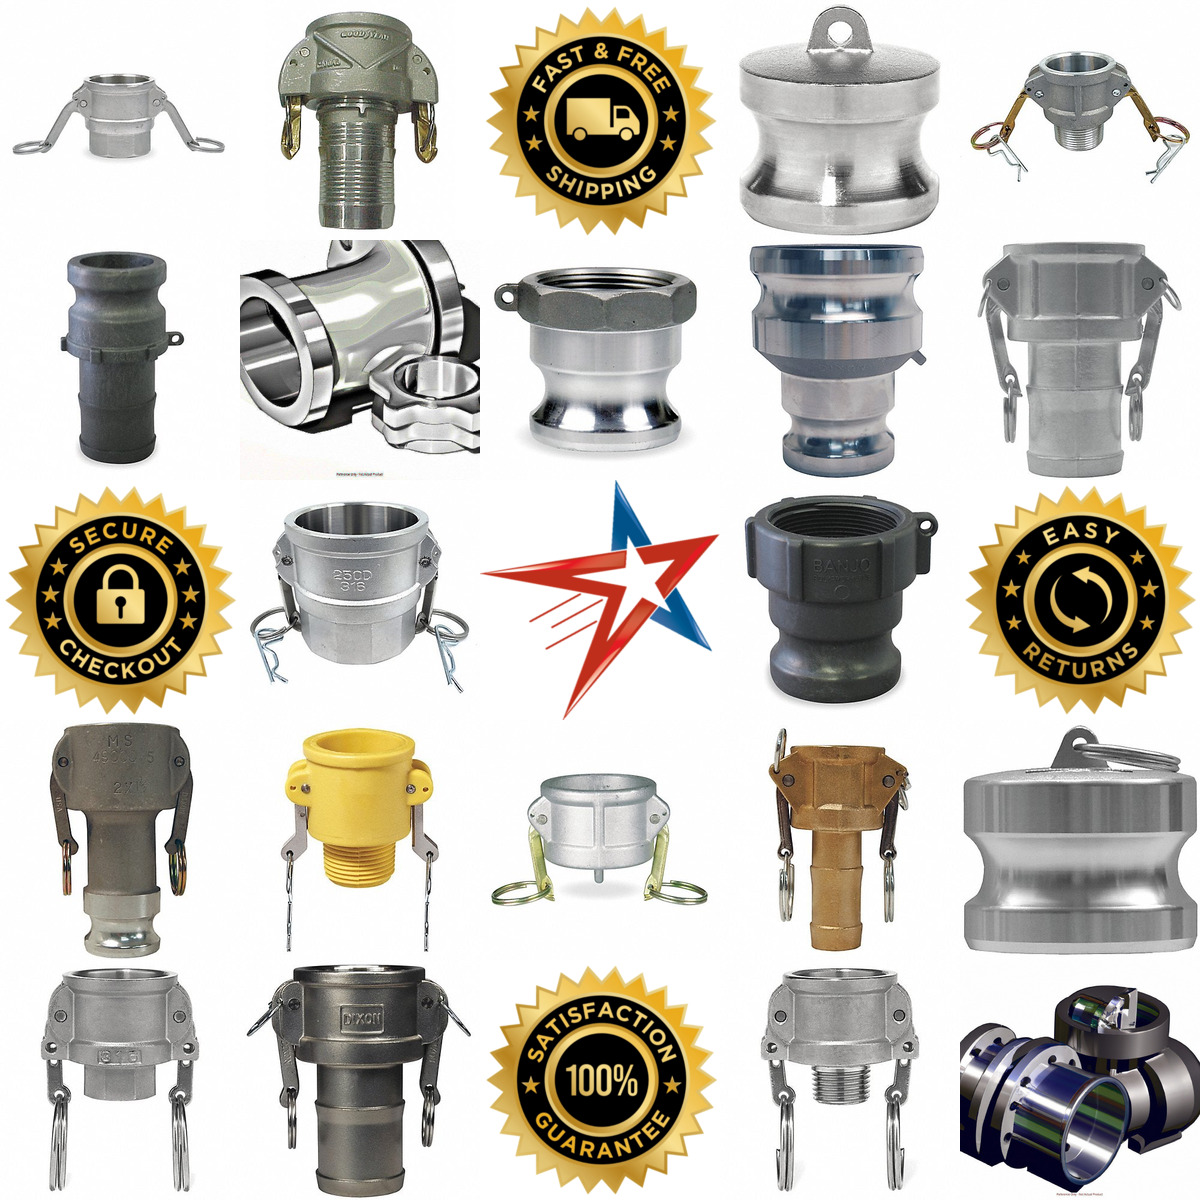 A selection of Hose Fittings and Couplings products on GoVets